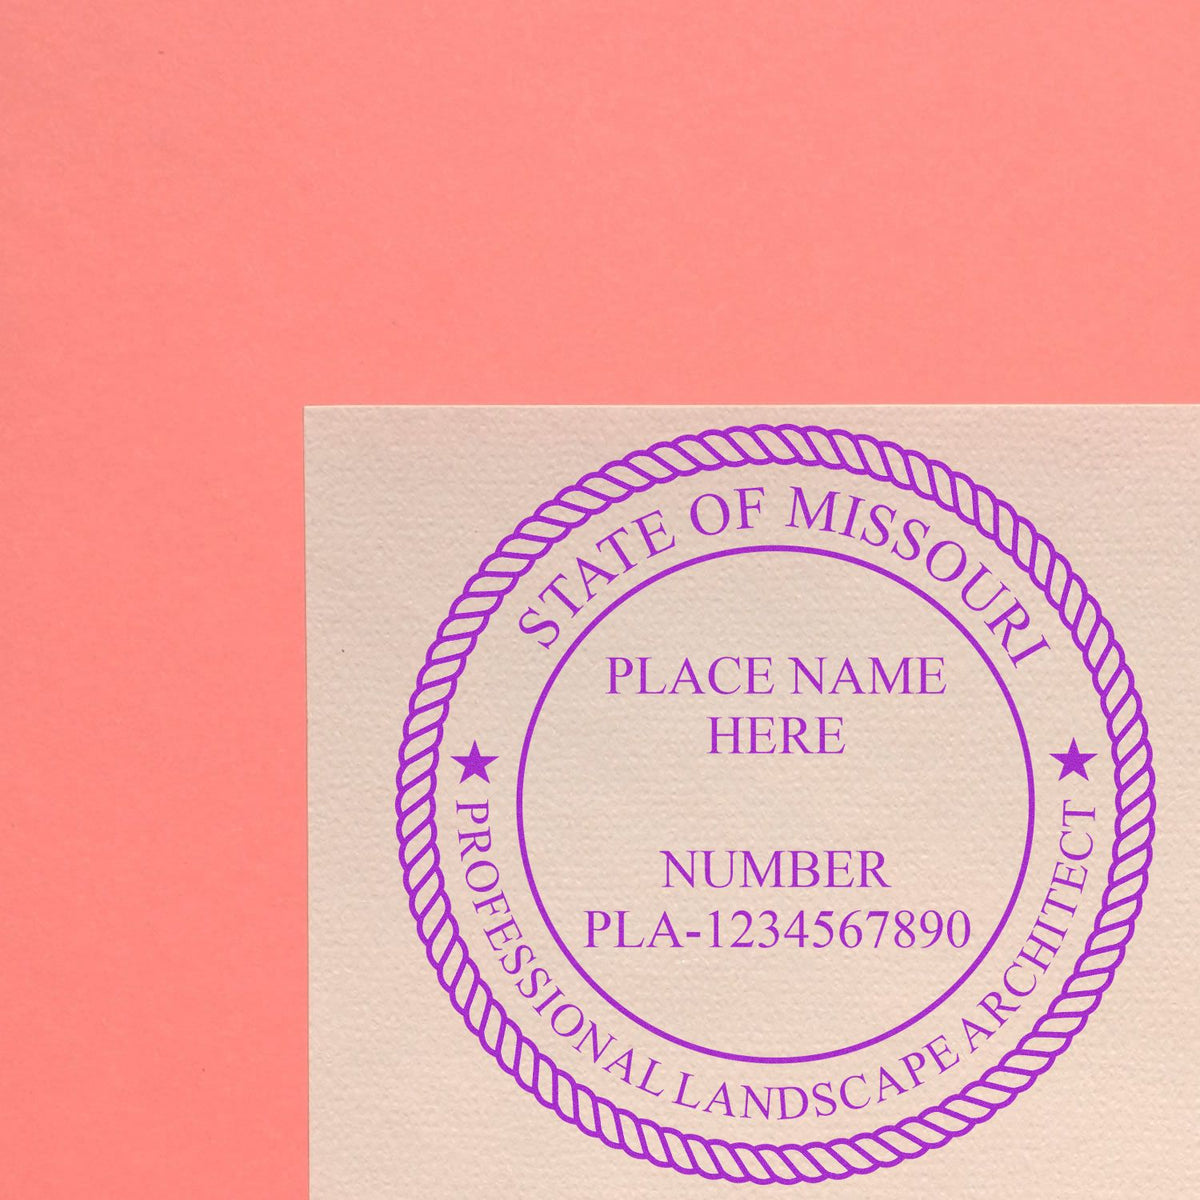 An alternative view of the Slim Pre-Inked Missouri Landscape Architect Seal Stamp stamped on a sheet of paper showing the image in use